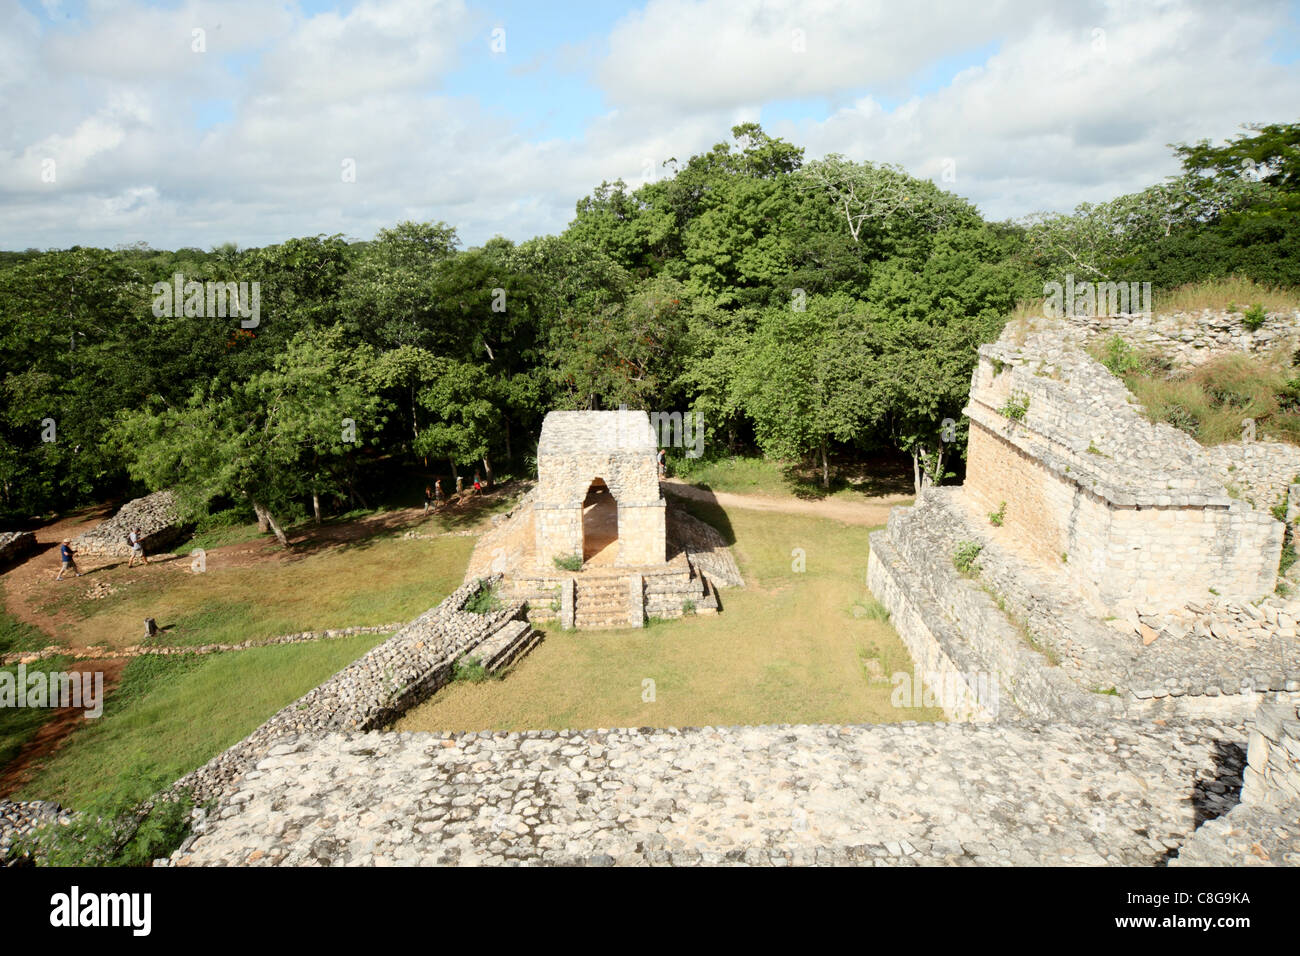 The Entrance Arch in the centre with one of the Twin Pyramids to the right, Mayan ruins, Ek Balam, Yucatan, Mexico Stock Photo